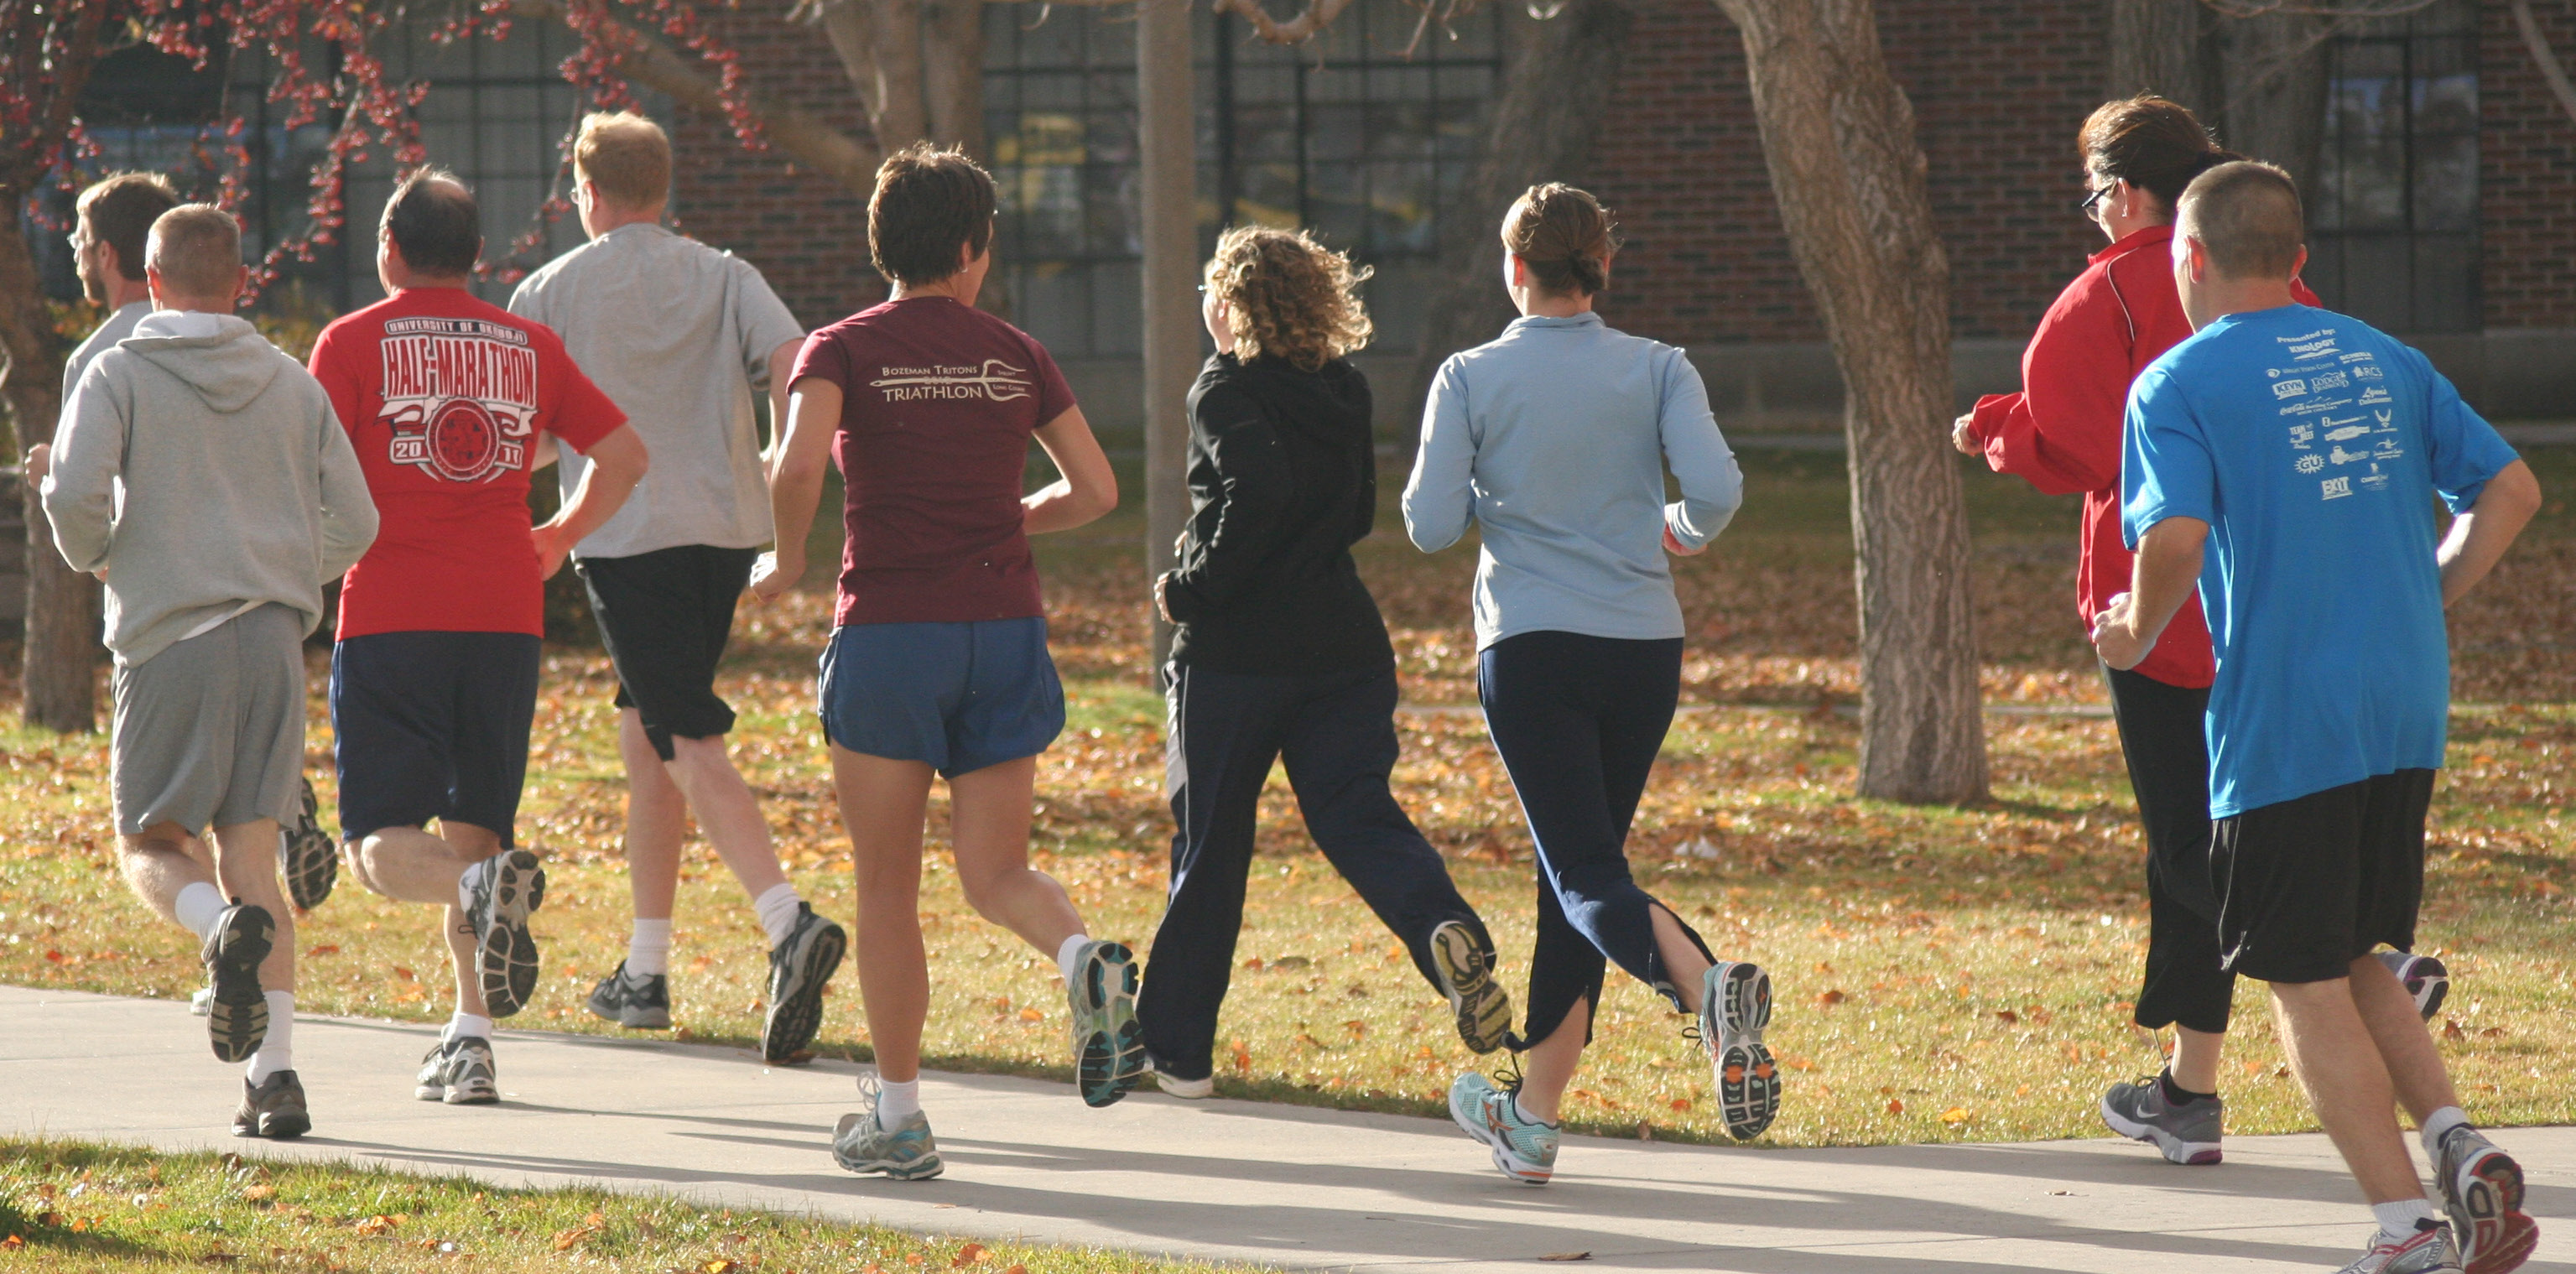 A group of men and women in exercise clothes on a run together.